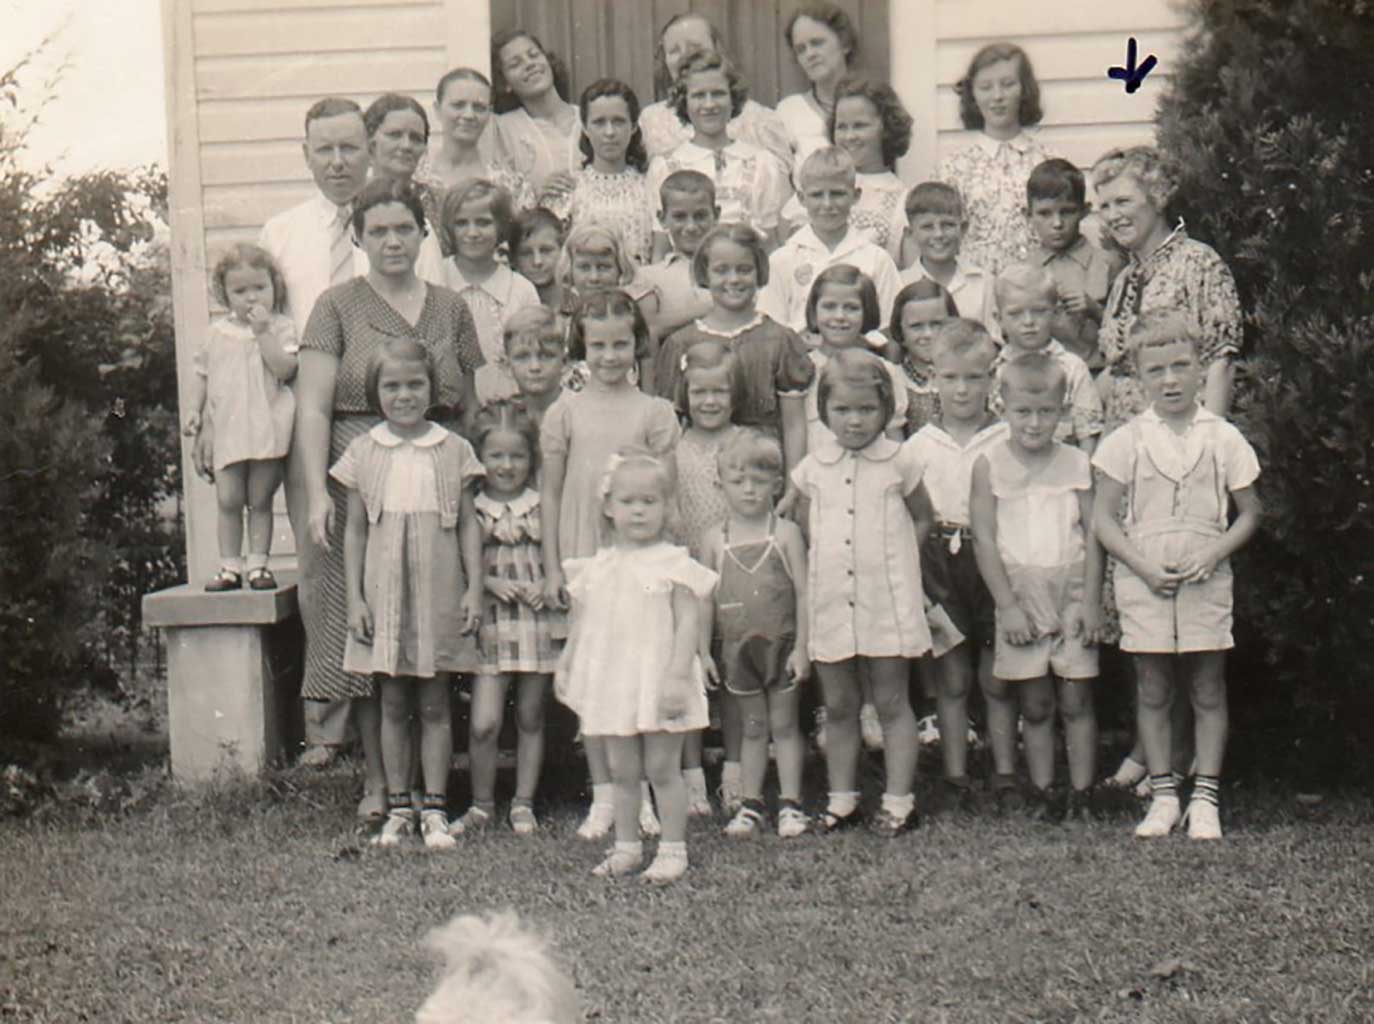 mrs-gilliam-with-vacation-bible-school-around-1940simg350